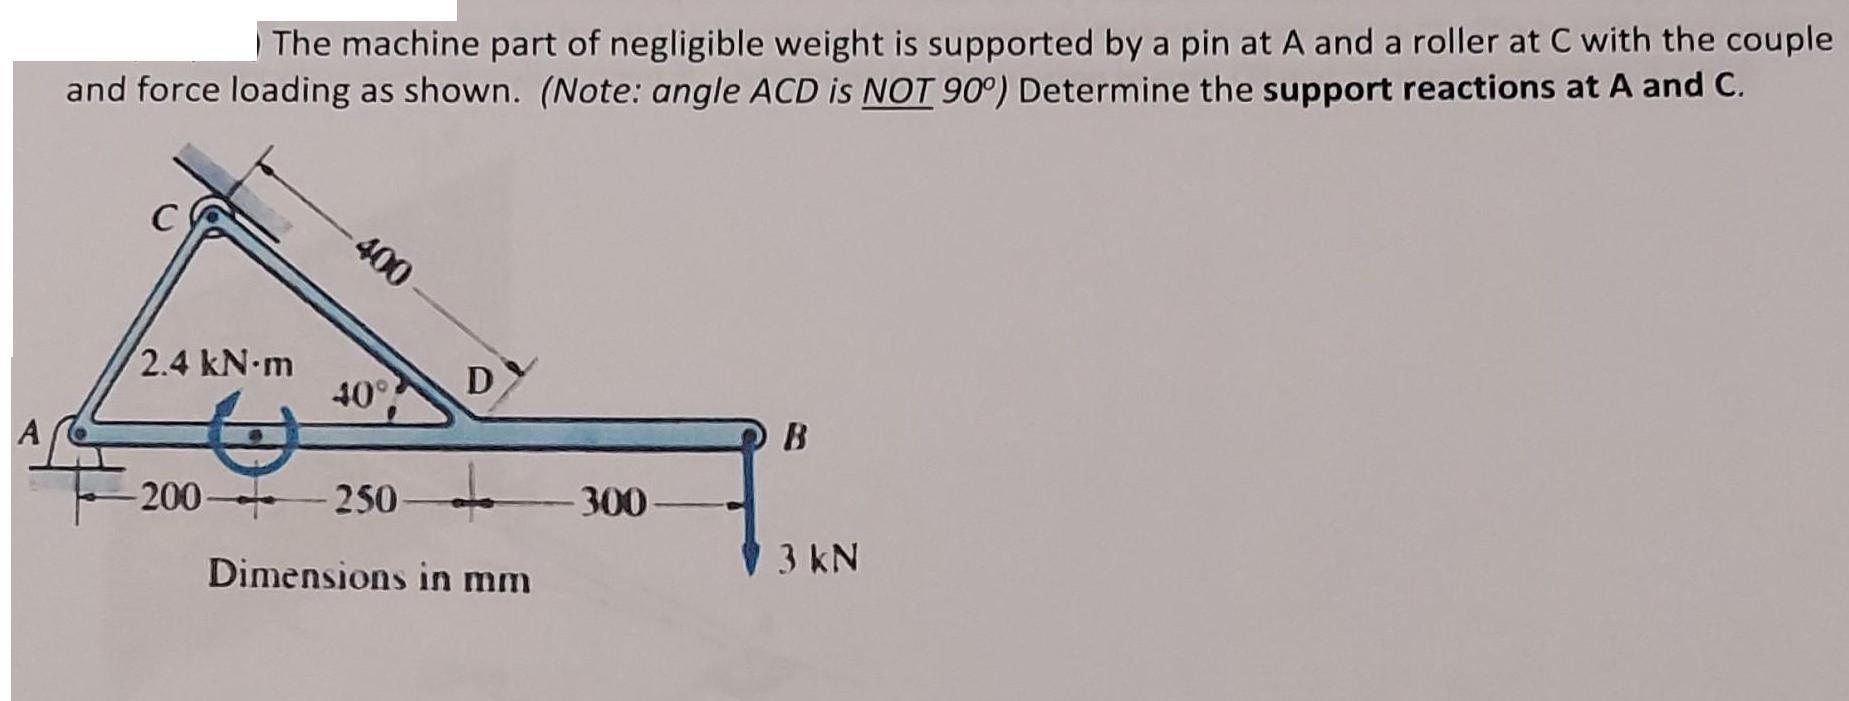 A The machine part of negligible weight is supported by a pin at A and a roller at C with the couple and